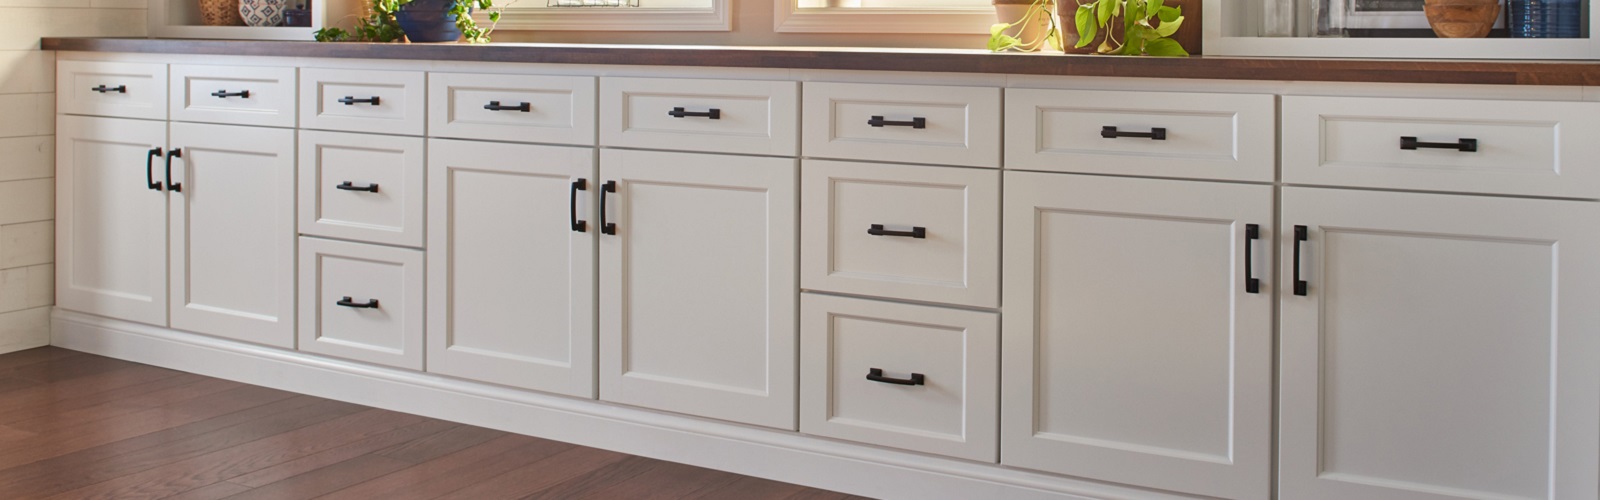 Your Kitchen Cabinet Door Style Choice Should Take Into Account